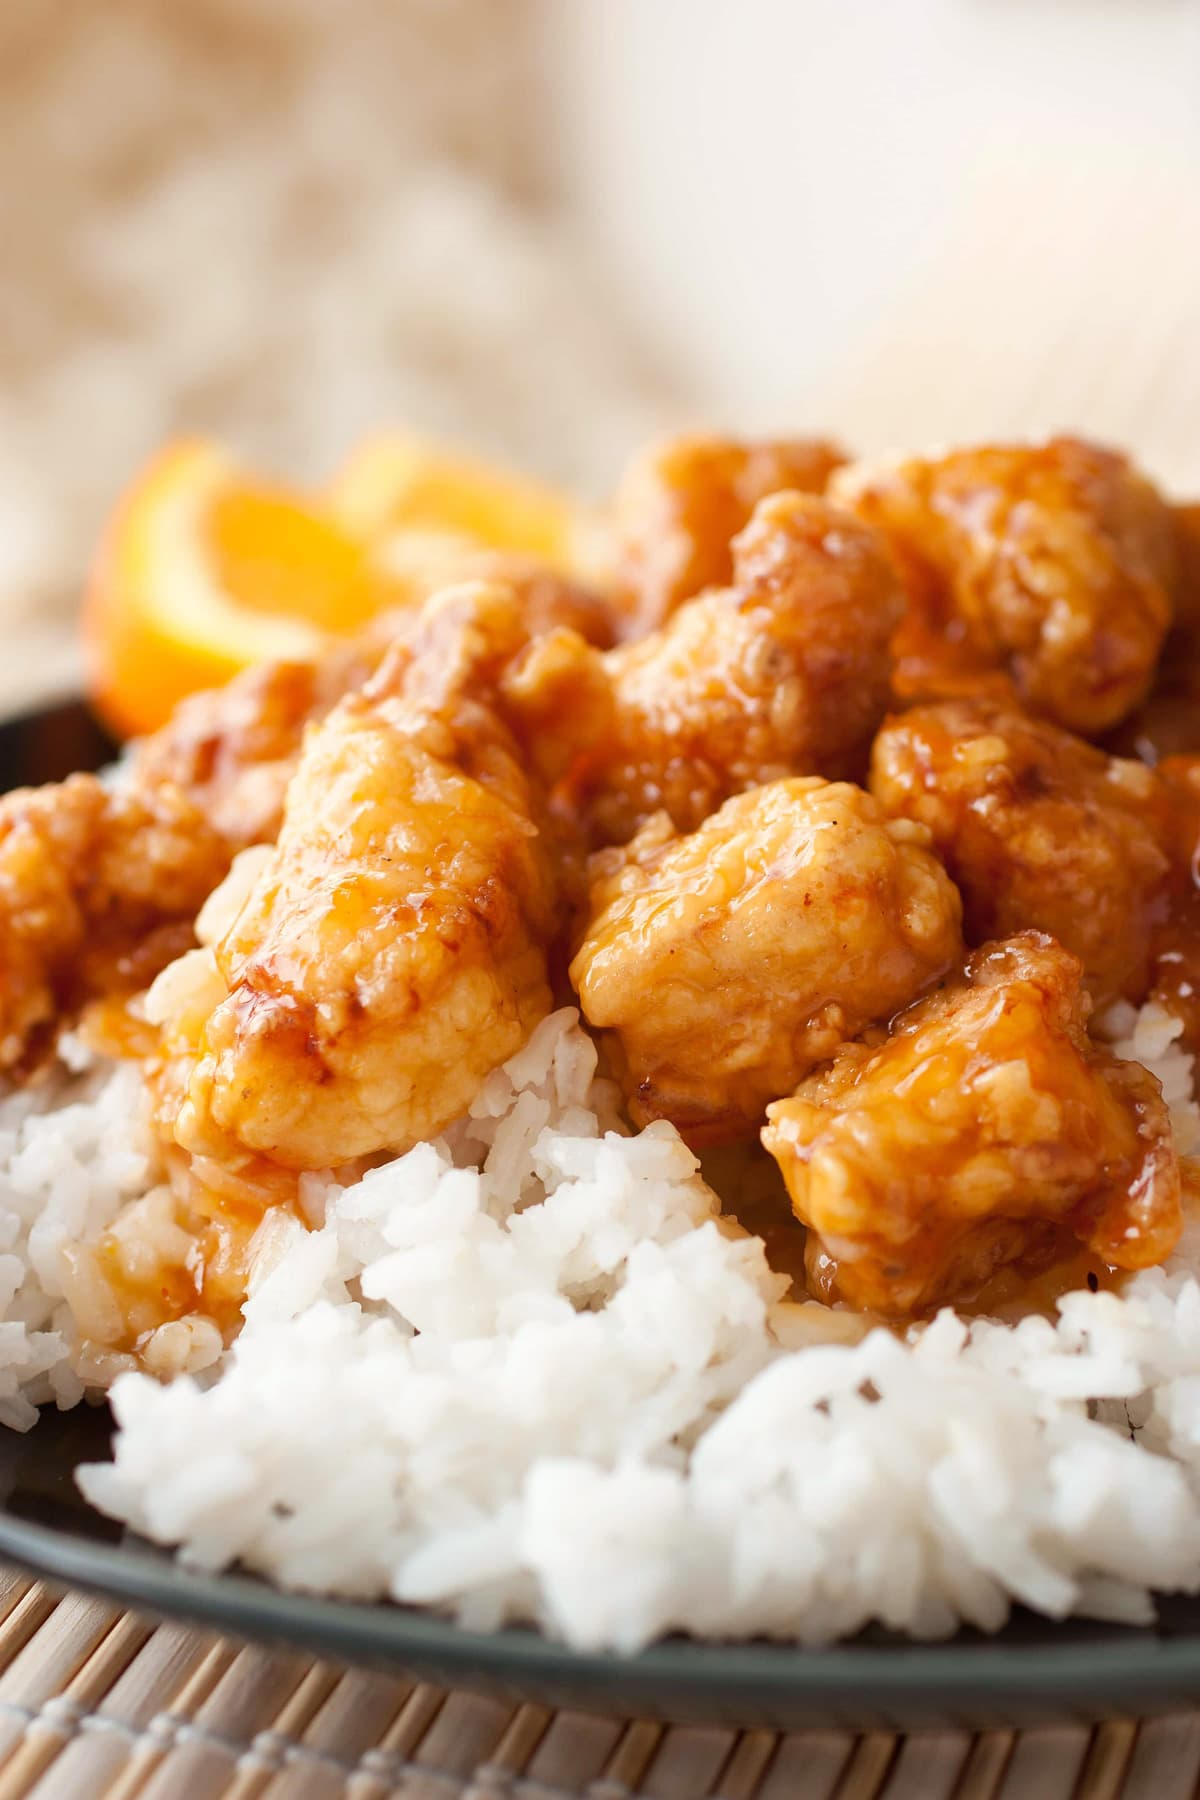 Orange Chicken shown here served over white rice on an individual plate garnished with fresh orange slices